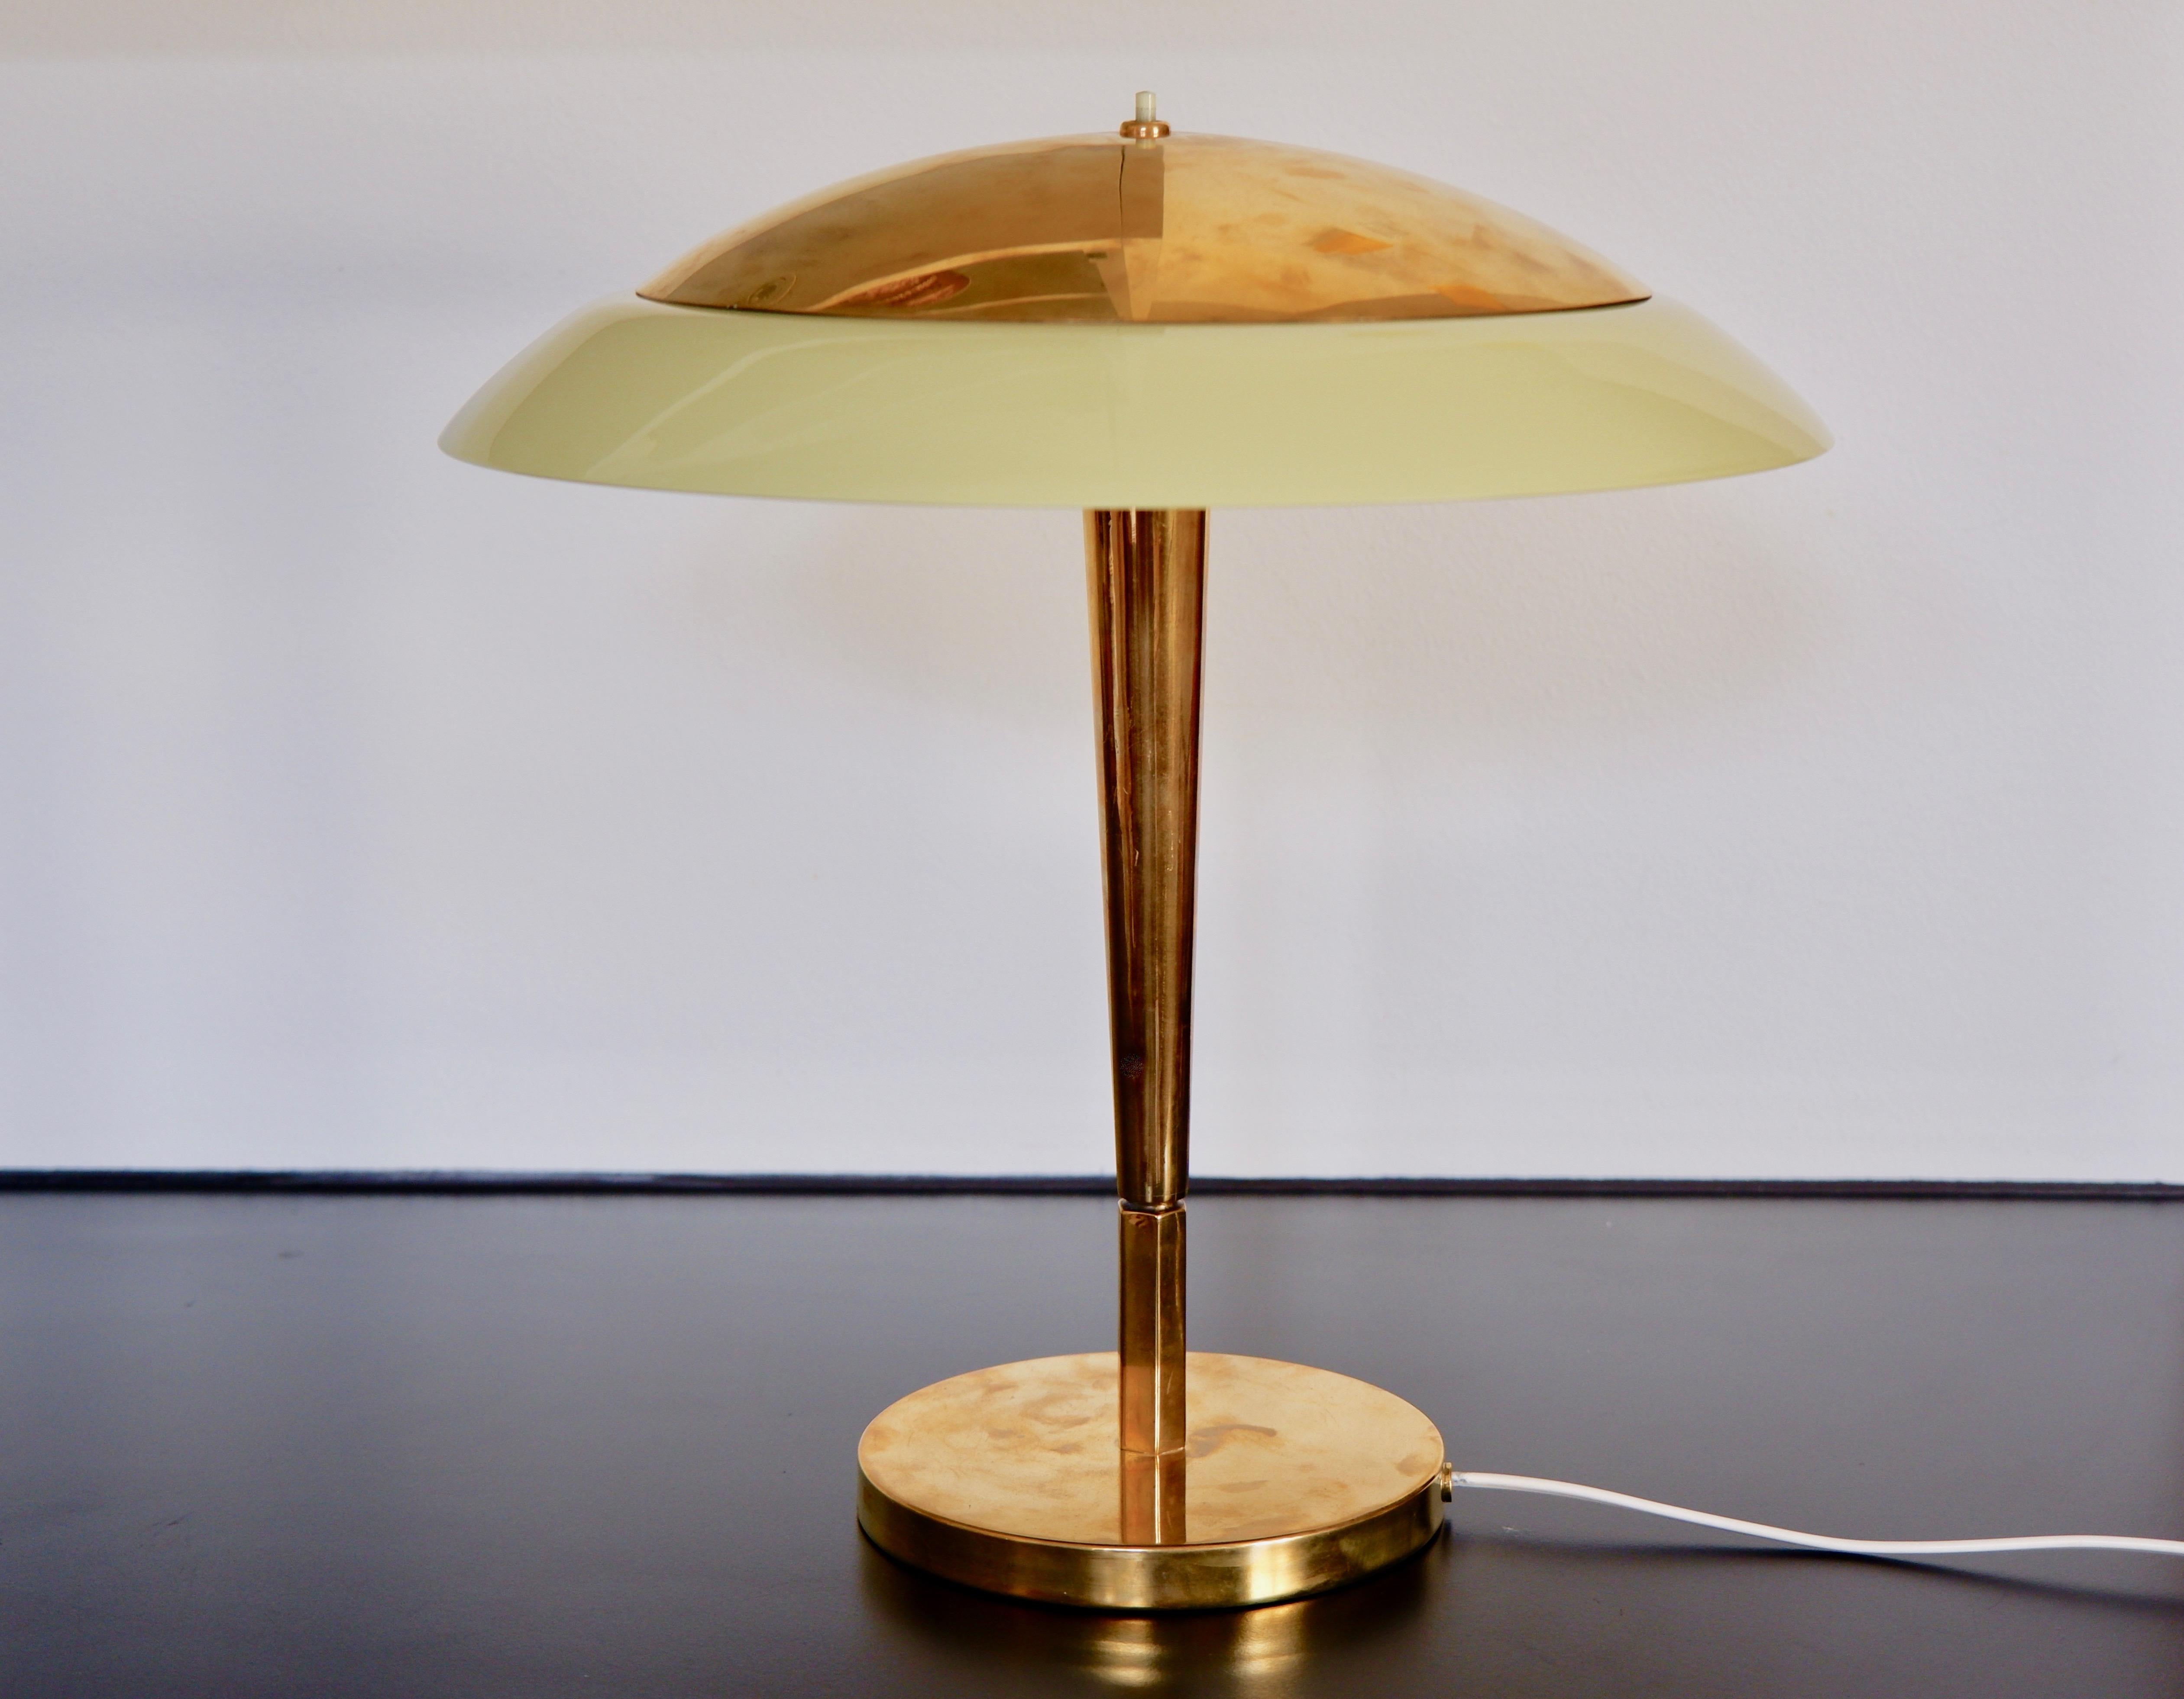 Impressive Paavo Tynell Table lamp made in polished brass and amber glass shade. The lamp is in great condition and it's stamped by the editor TAITO. Model 5061. Dimension : 38.5 cm high, 36 cm diameter. Paavo Tynell was one of the most prolific